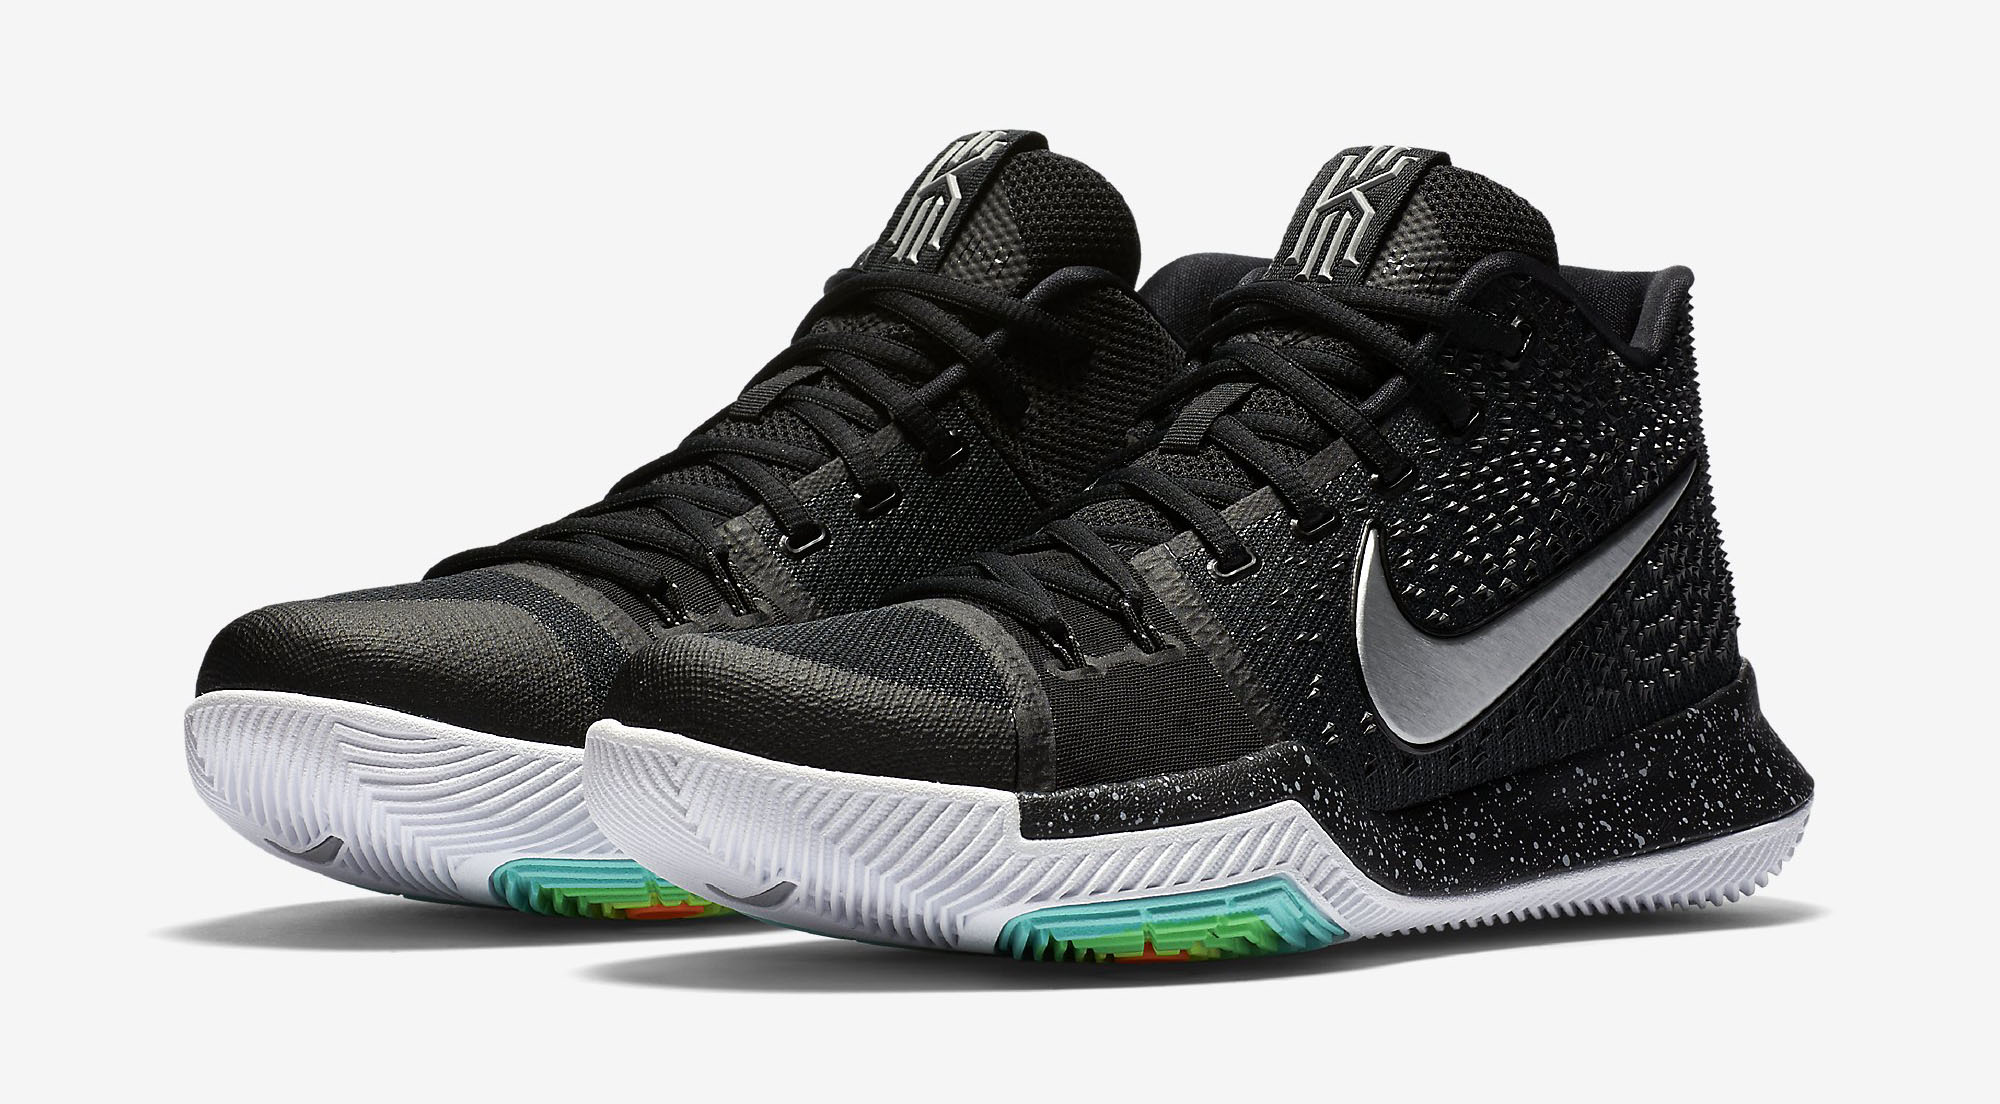 kyrie 3 shoes black and gold